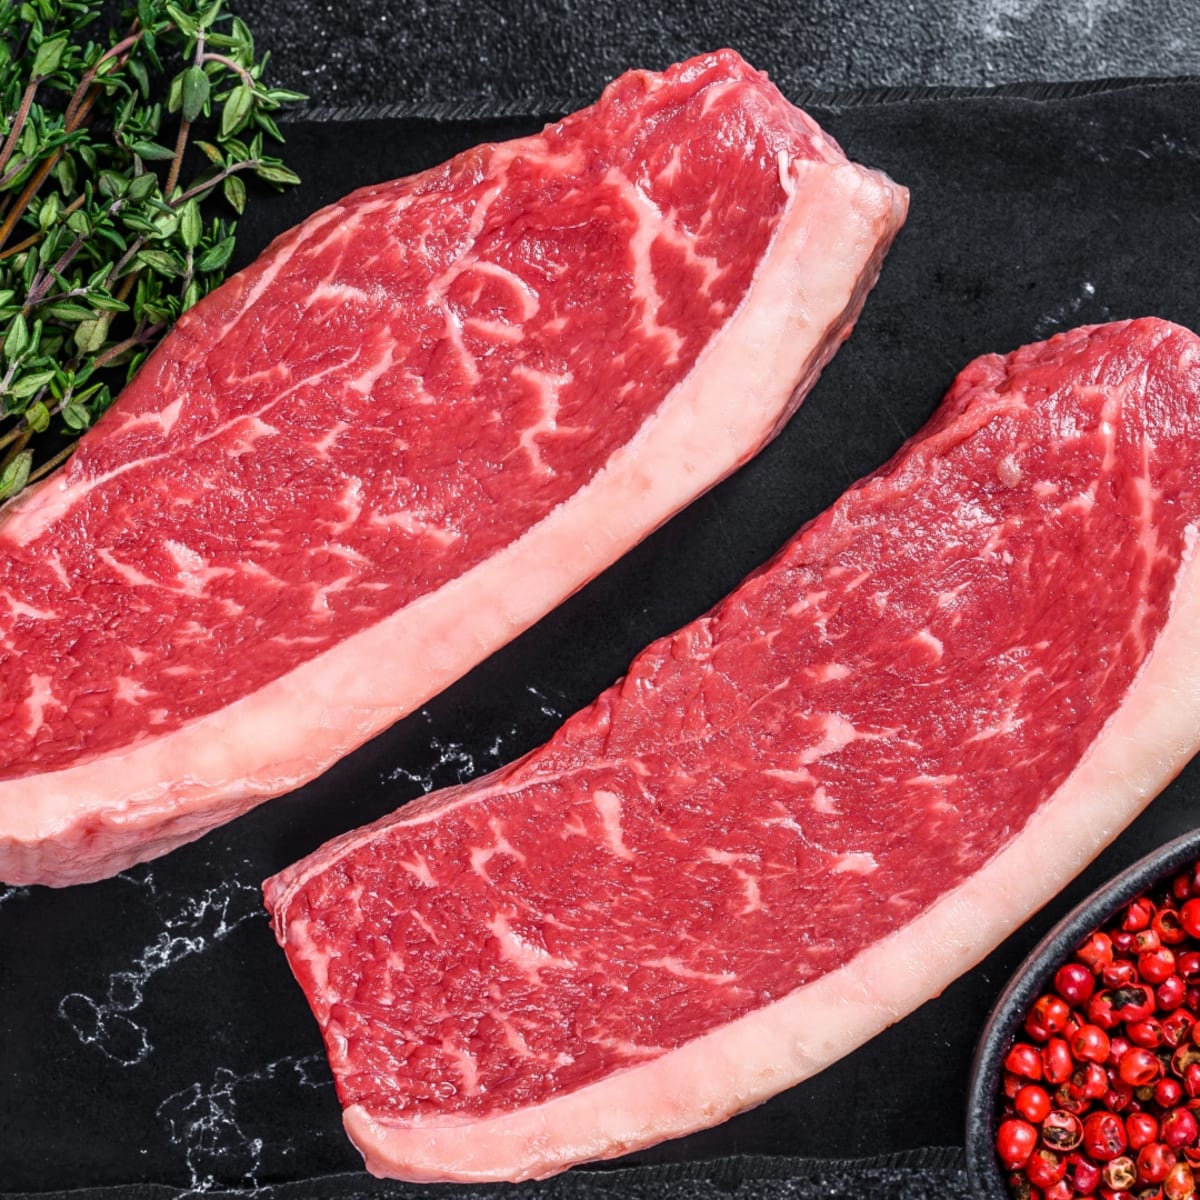 The best steak in the world: What is it about steak that makes